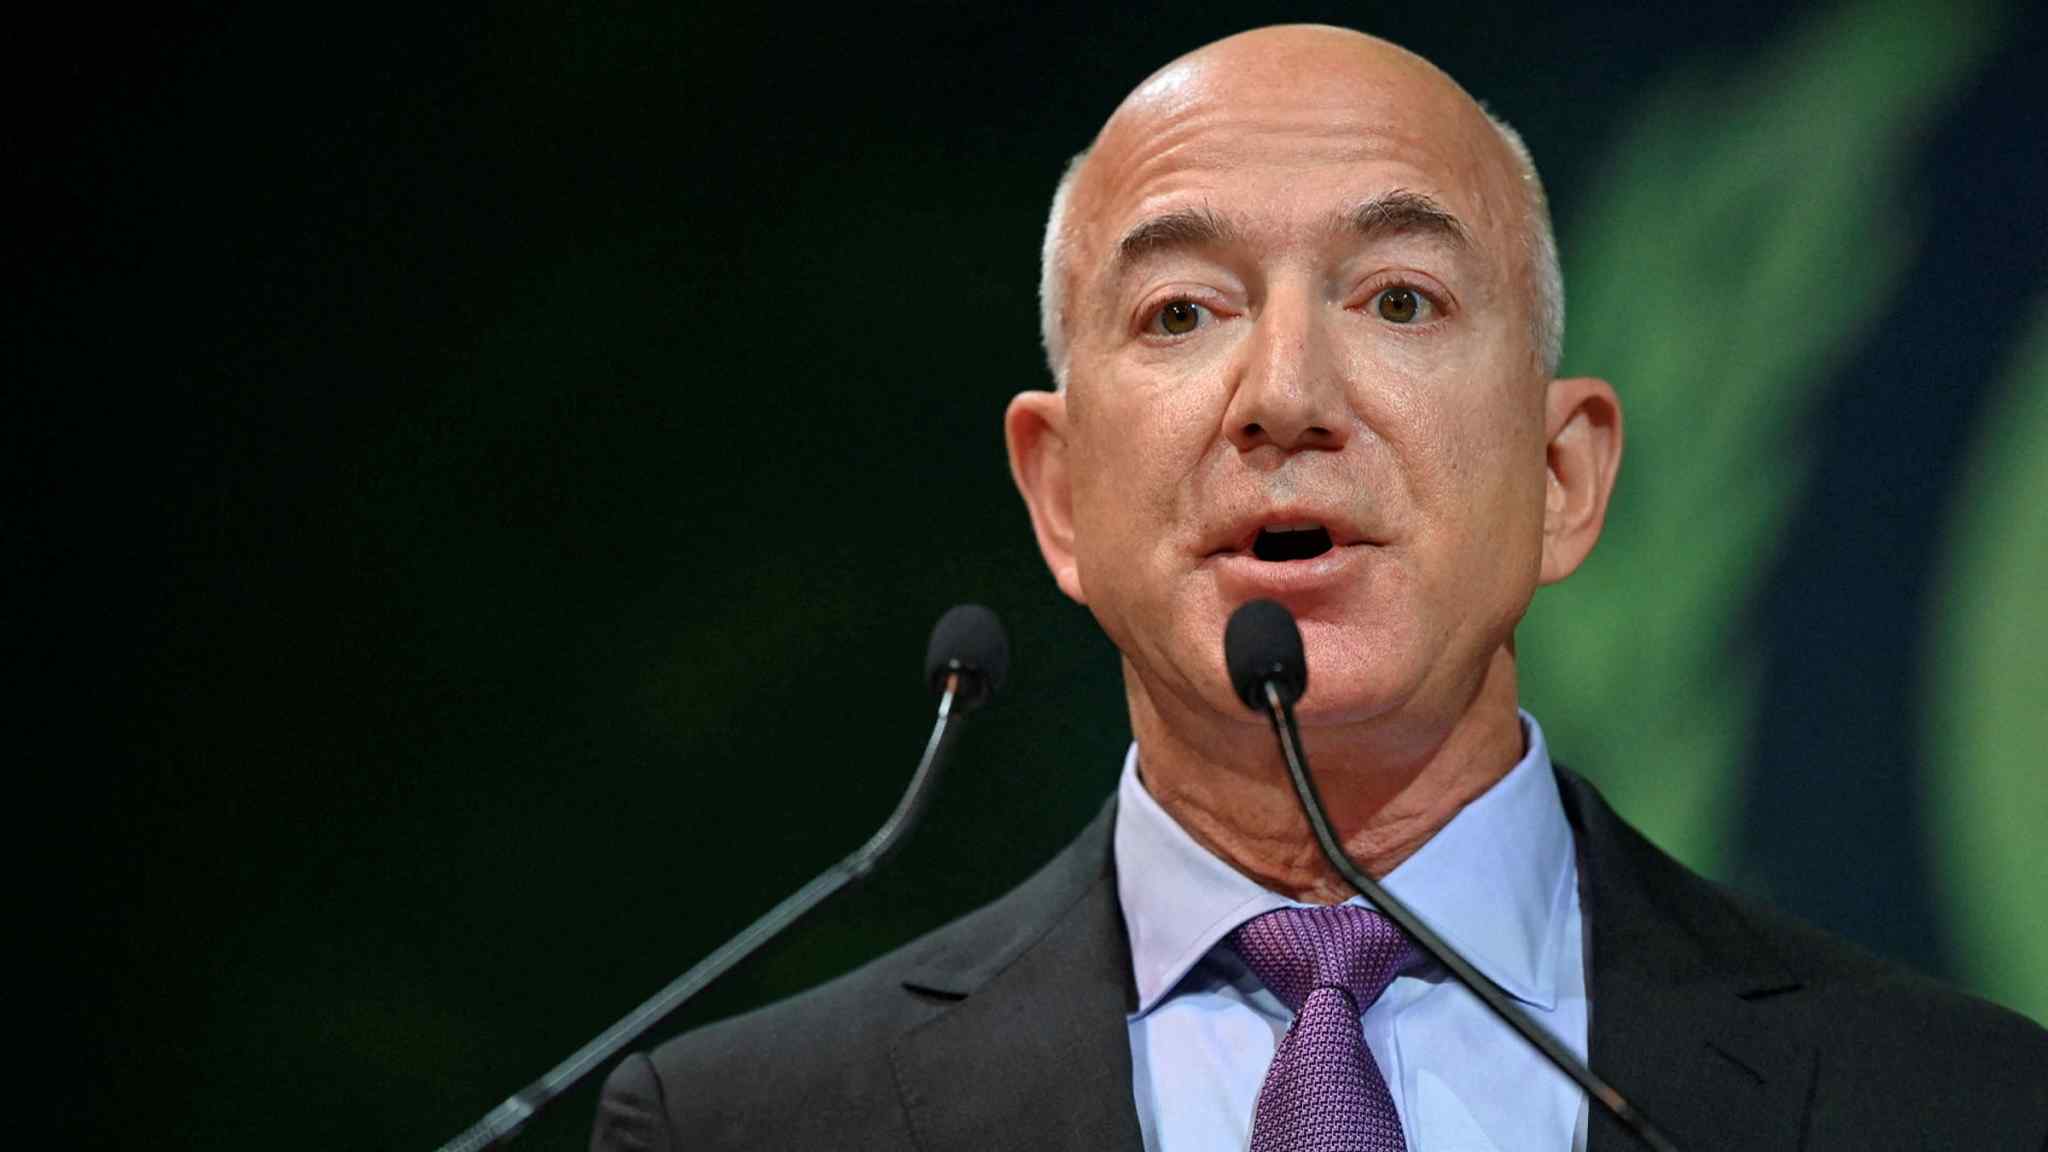 Jeff Bezos clashes with Biden administration again over inflation